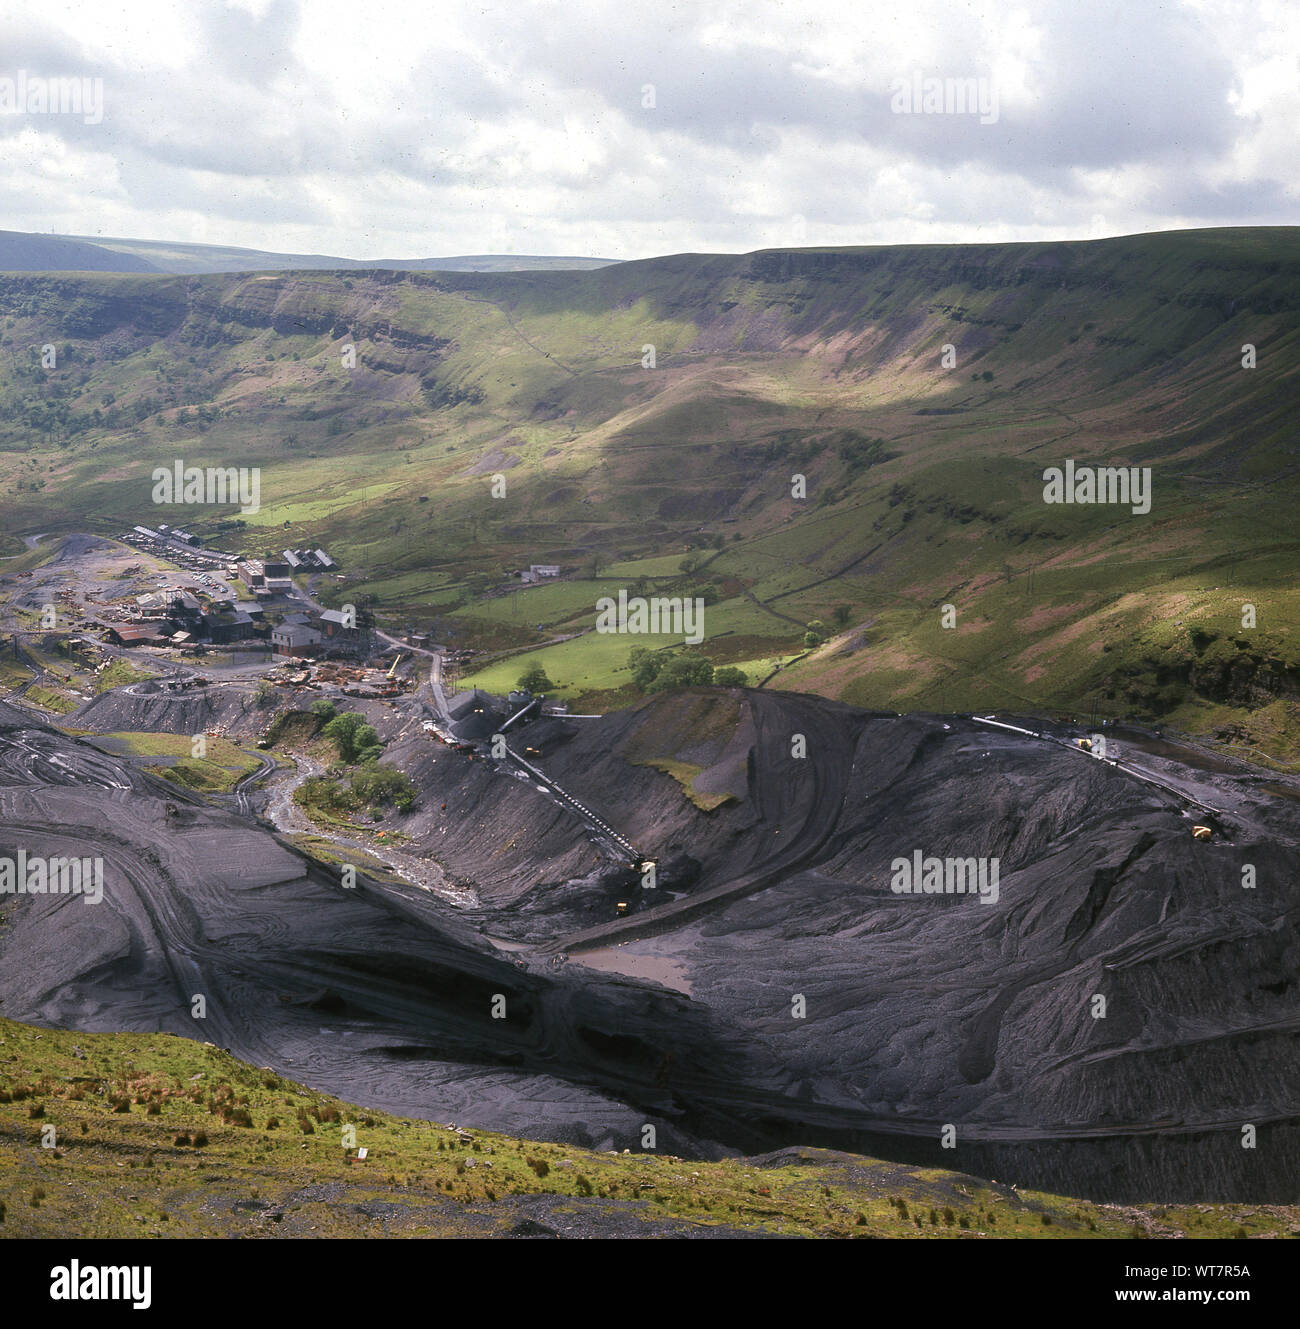 1960s, historical, Blaenrhondda, Wales, showing the surrounding landscape and the coal mining levels, the horizontal cuts made into the hillside to access the seams of coal.  From the 1860s, the Rhondda valley was one of the world's most important coal mining regions. Stock Photo